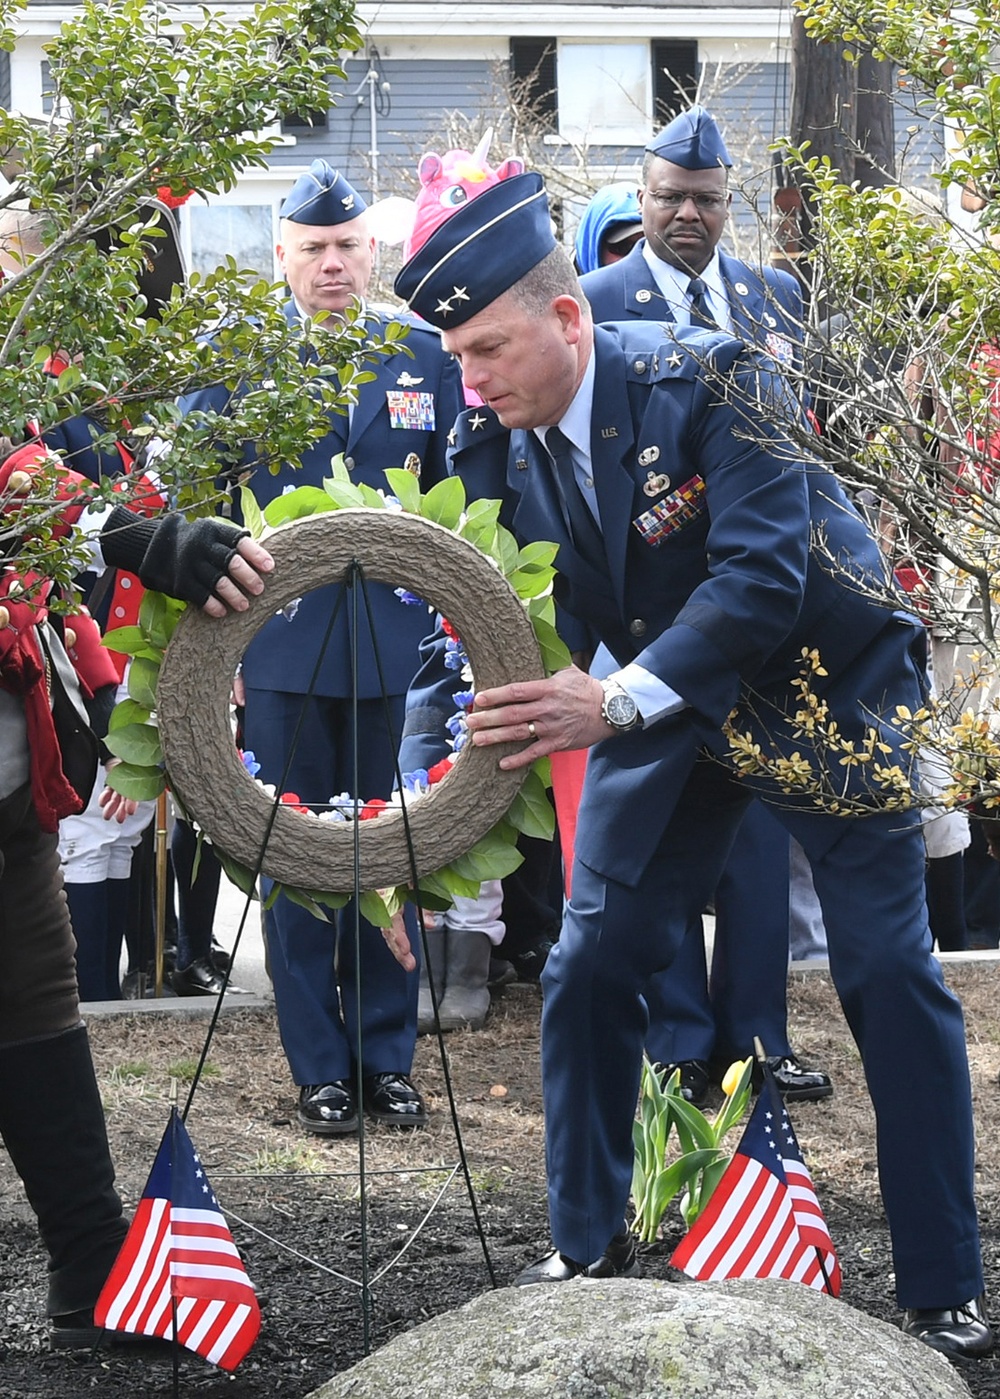 Airmen participate in Bedford Pole Capping